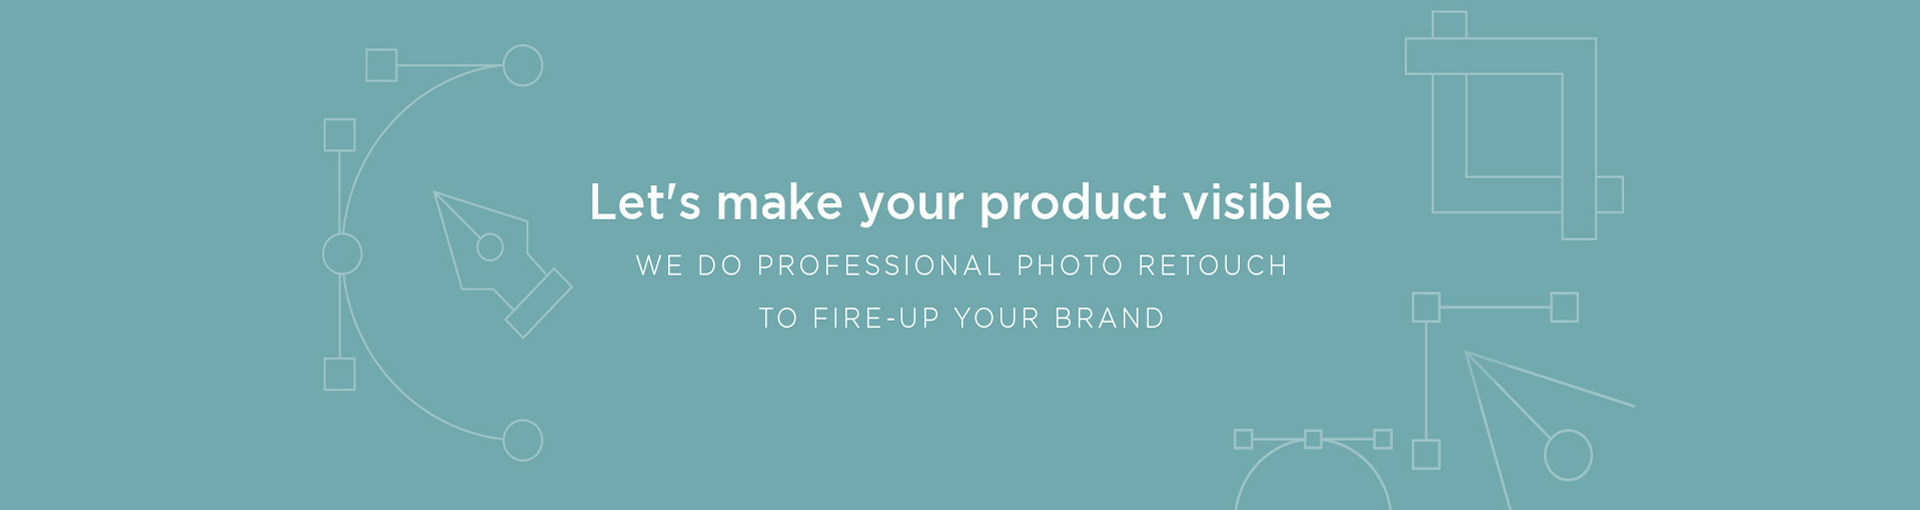 Let's make your product visible